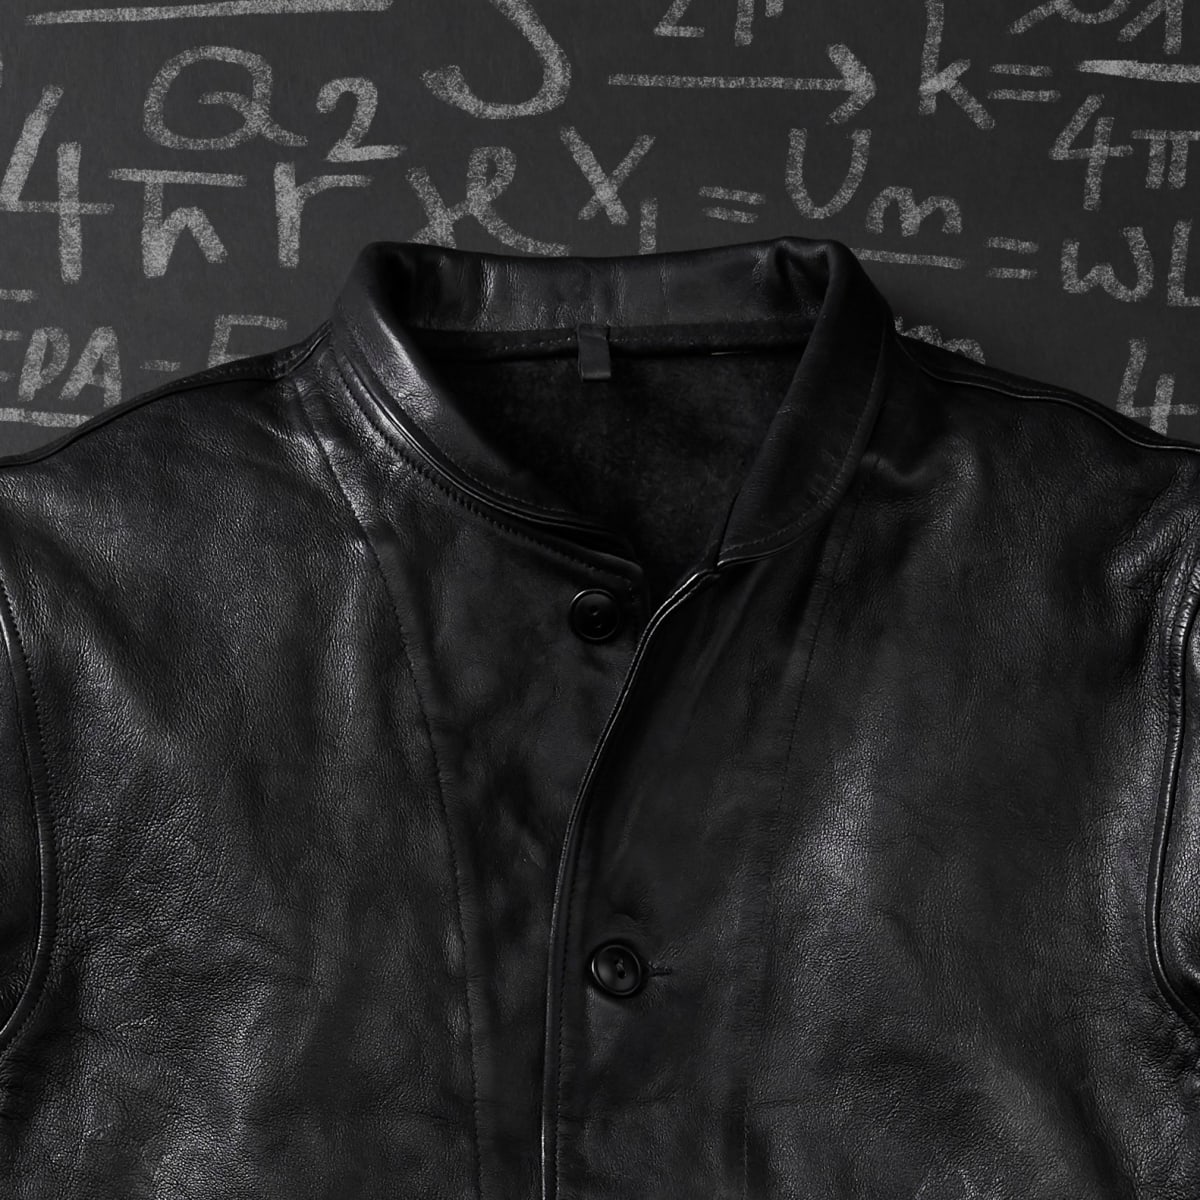 Levi's Vintage Clothing is releasing a replica of the Menlo Cossack Jacket  worn by Albert Einstein - Acquire